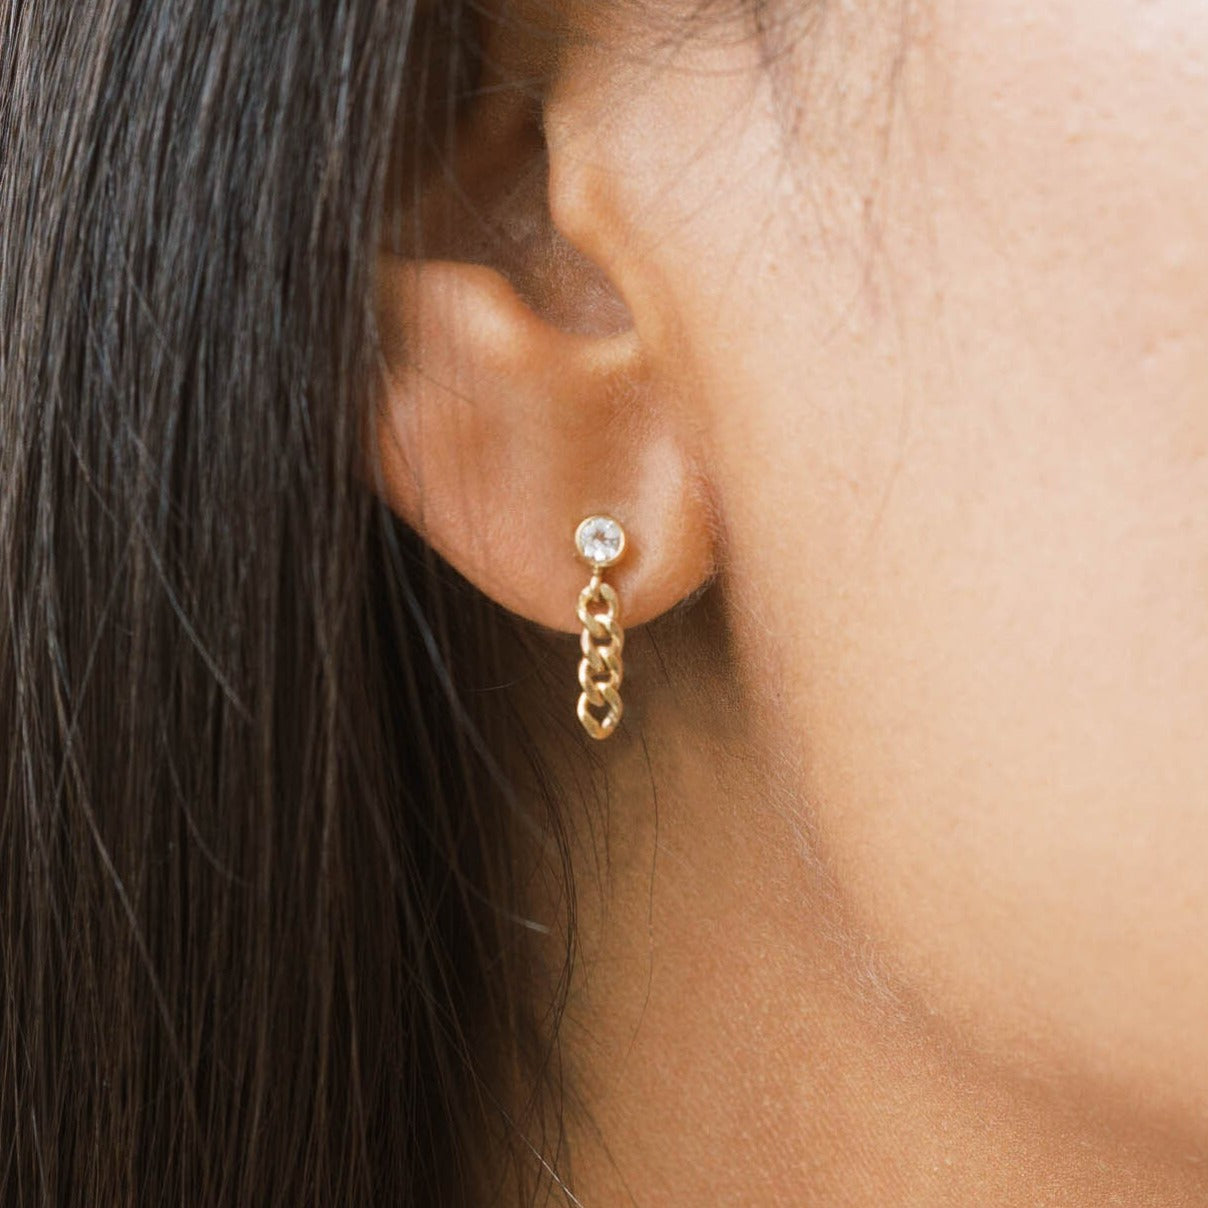 White topaz stud earring with a gold chain hanging down.